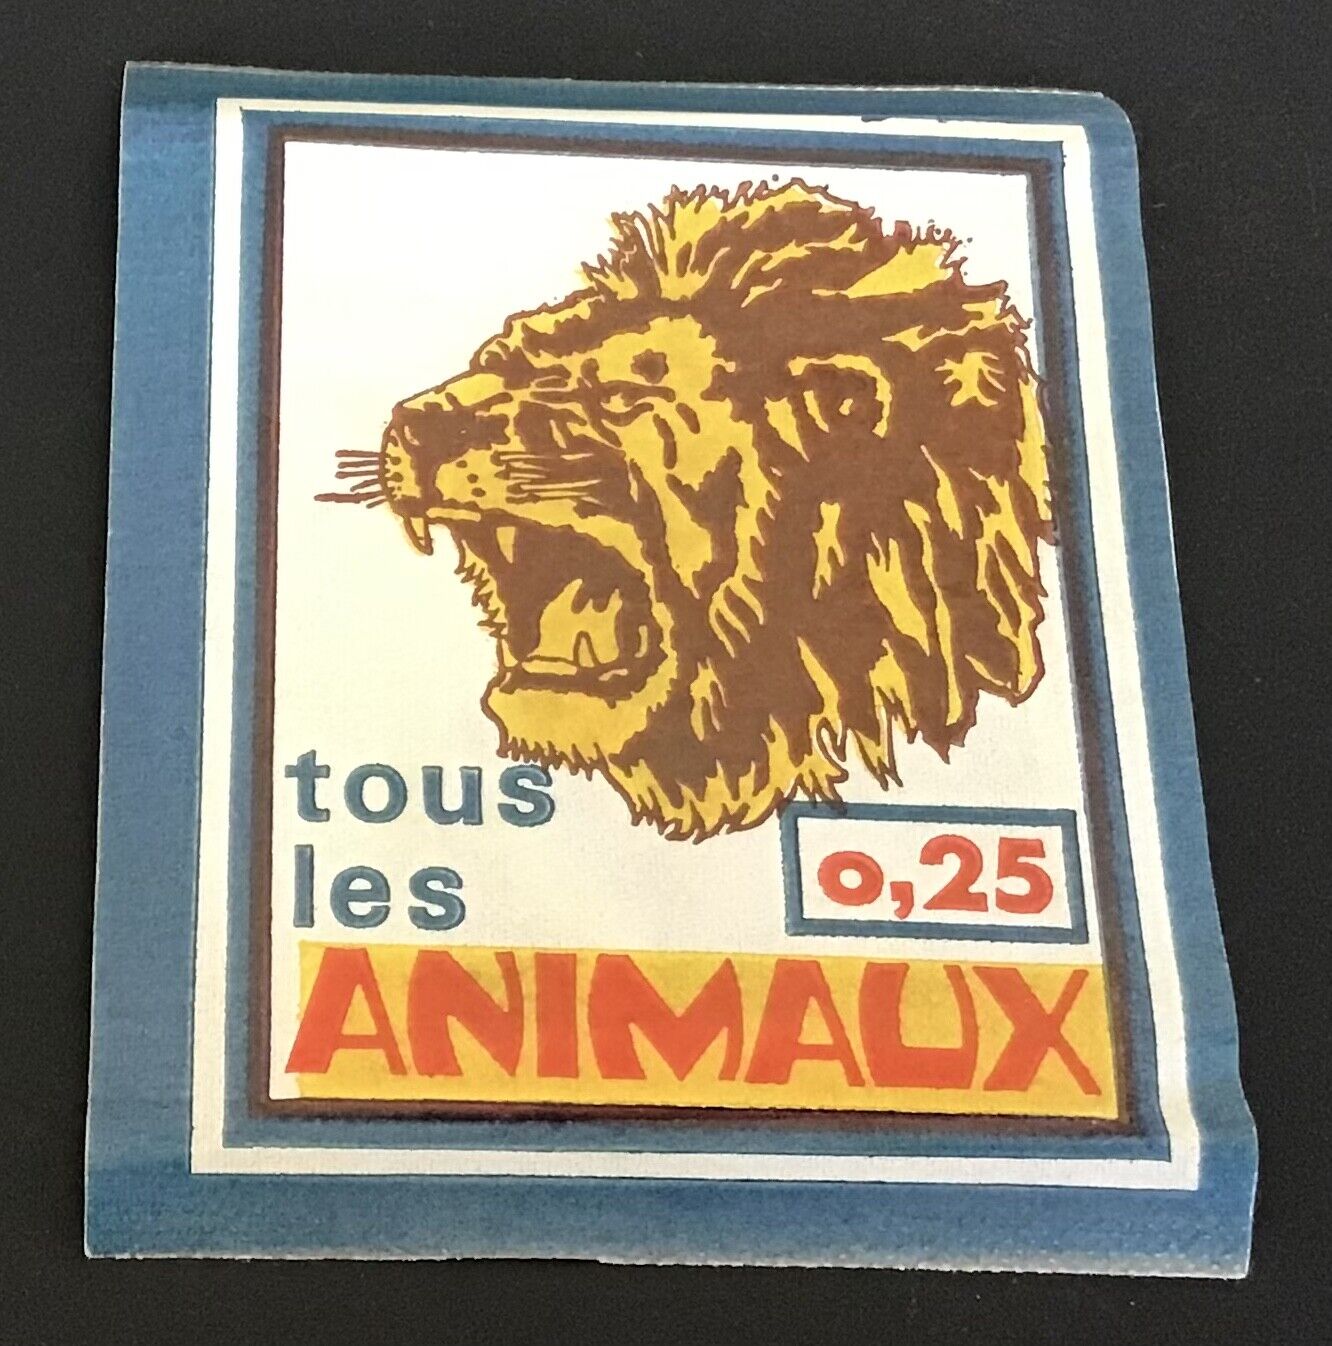            1970 Panini Tous Les Animaux Sticker Sealed Pack